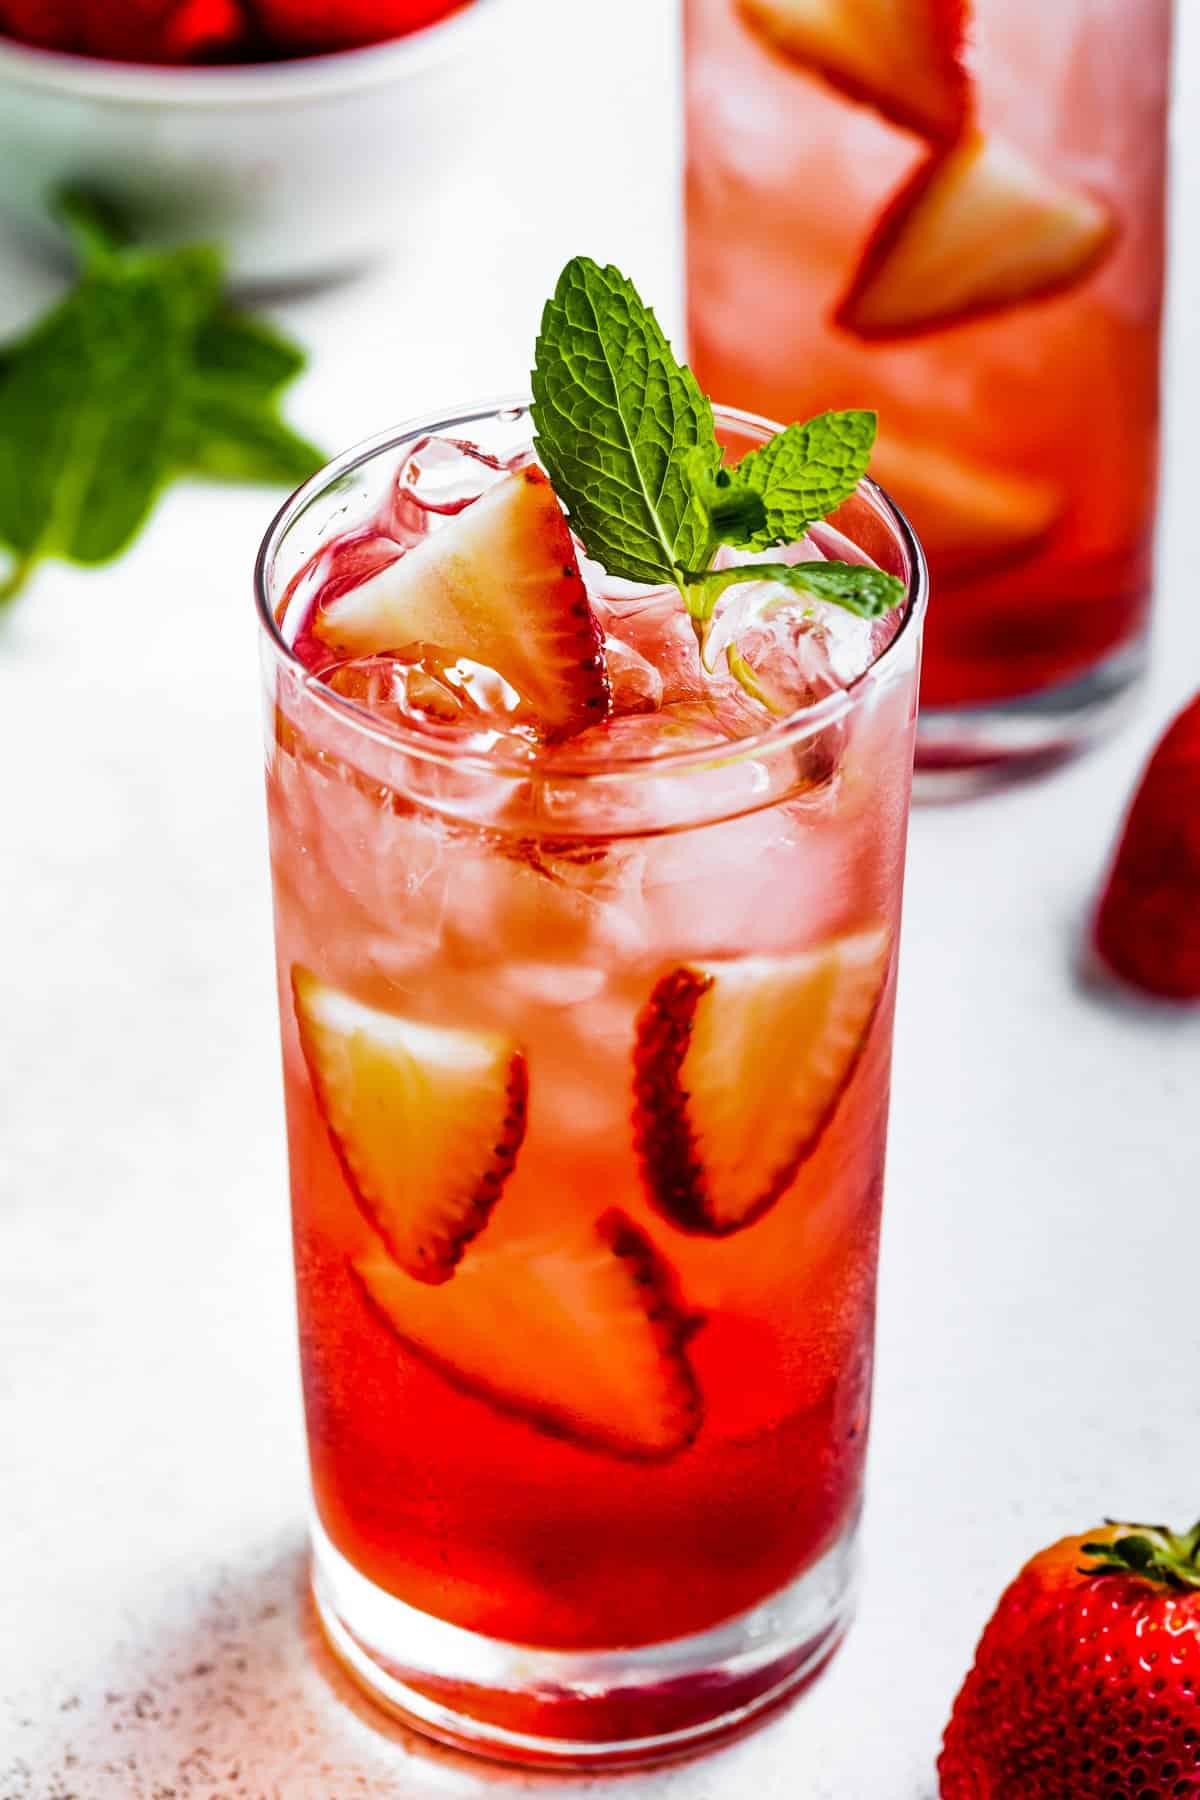 Highball glass with hibiscus iced tea garnished with mint and strawberries.